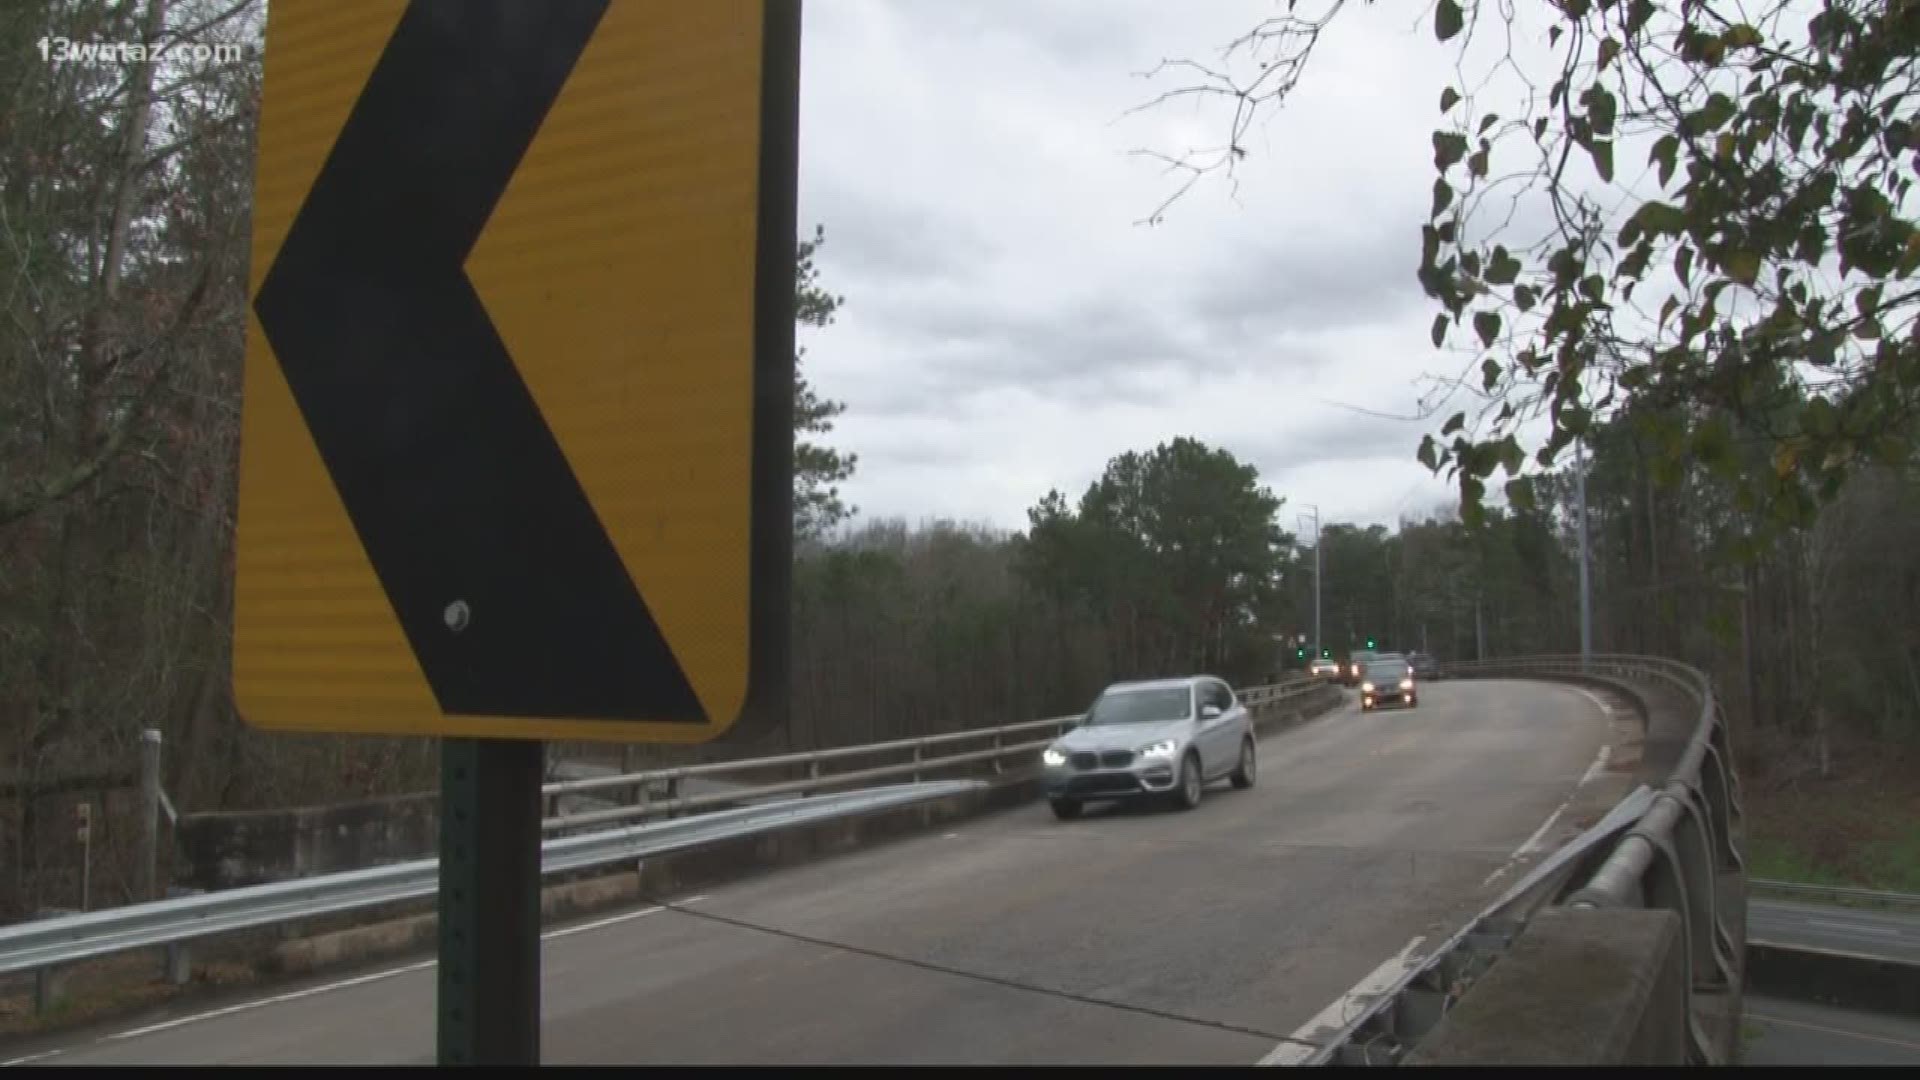 Penny Brooks with Georgia Department of Transportation says they plan to start the bridge over 475 first. It won't require a detour.